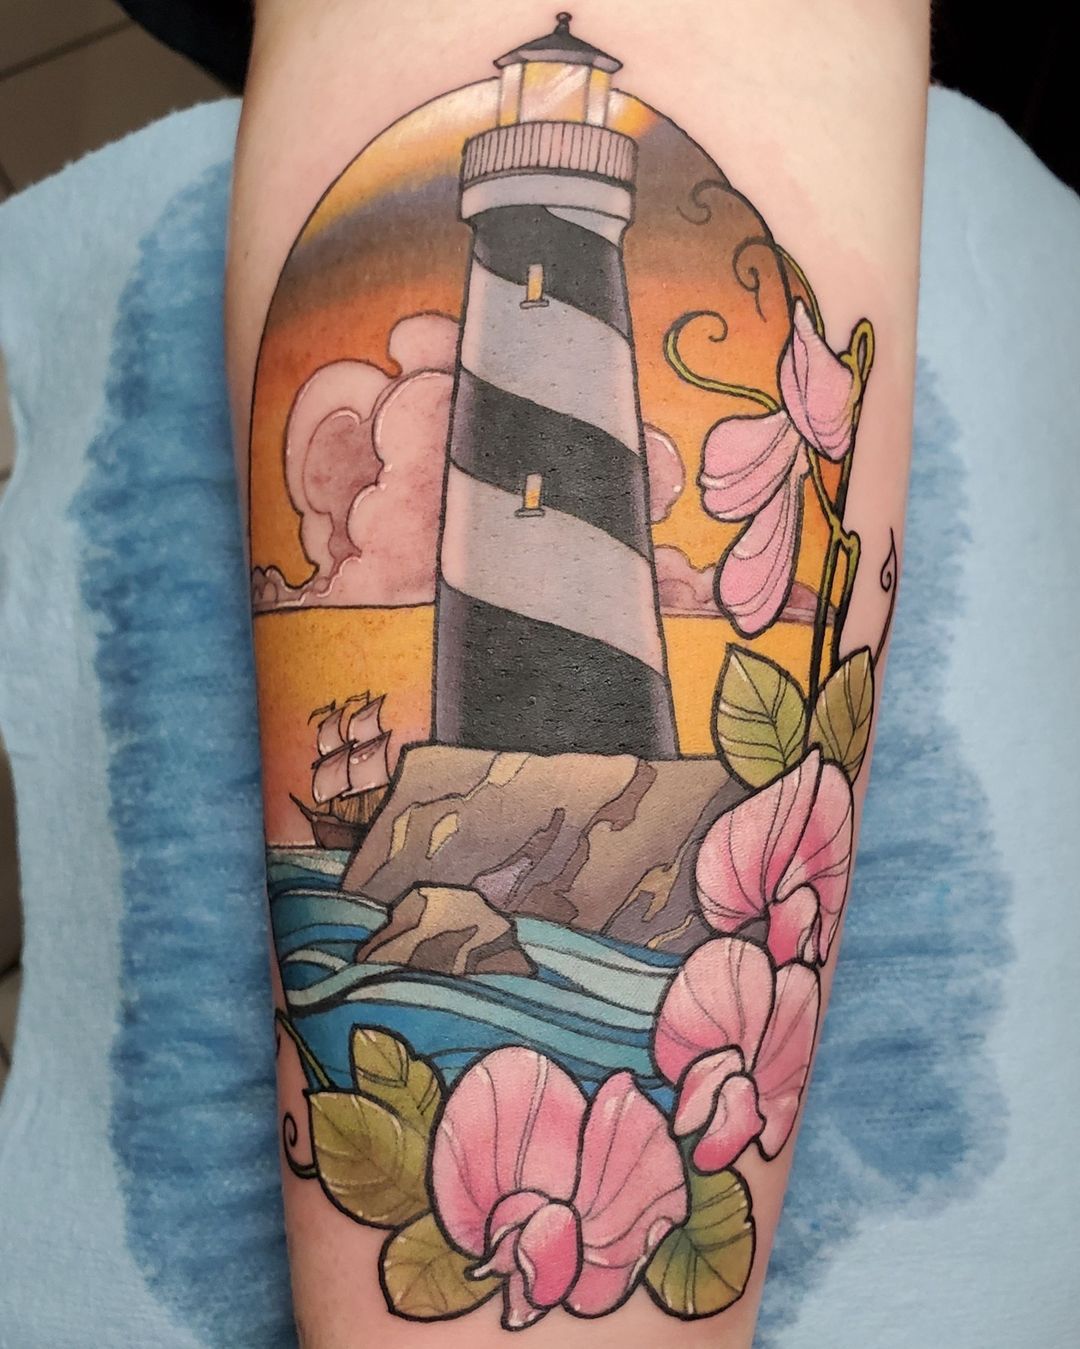 Lighthouse Tattoo The Best Ideas and Templates